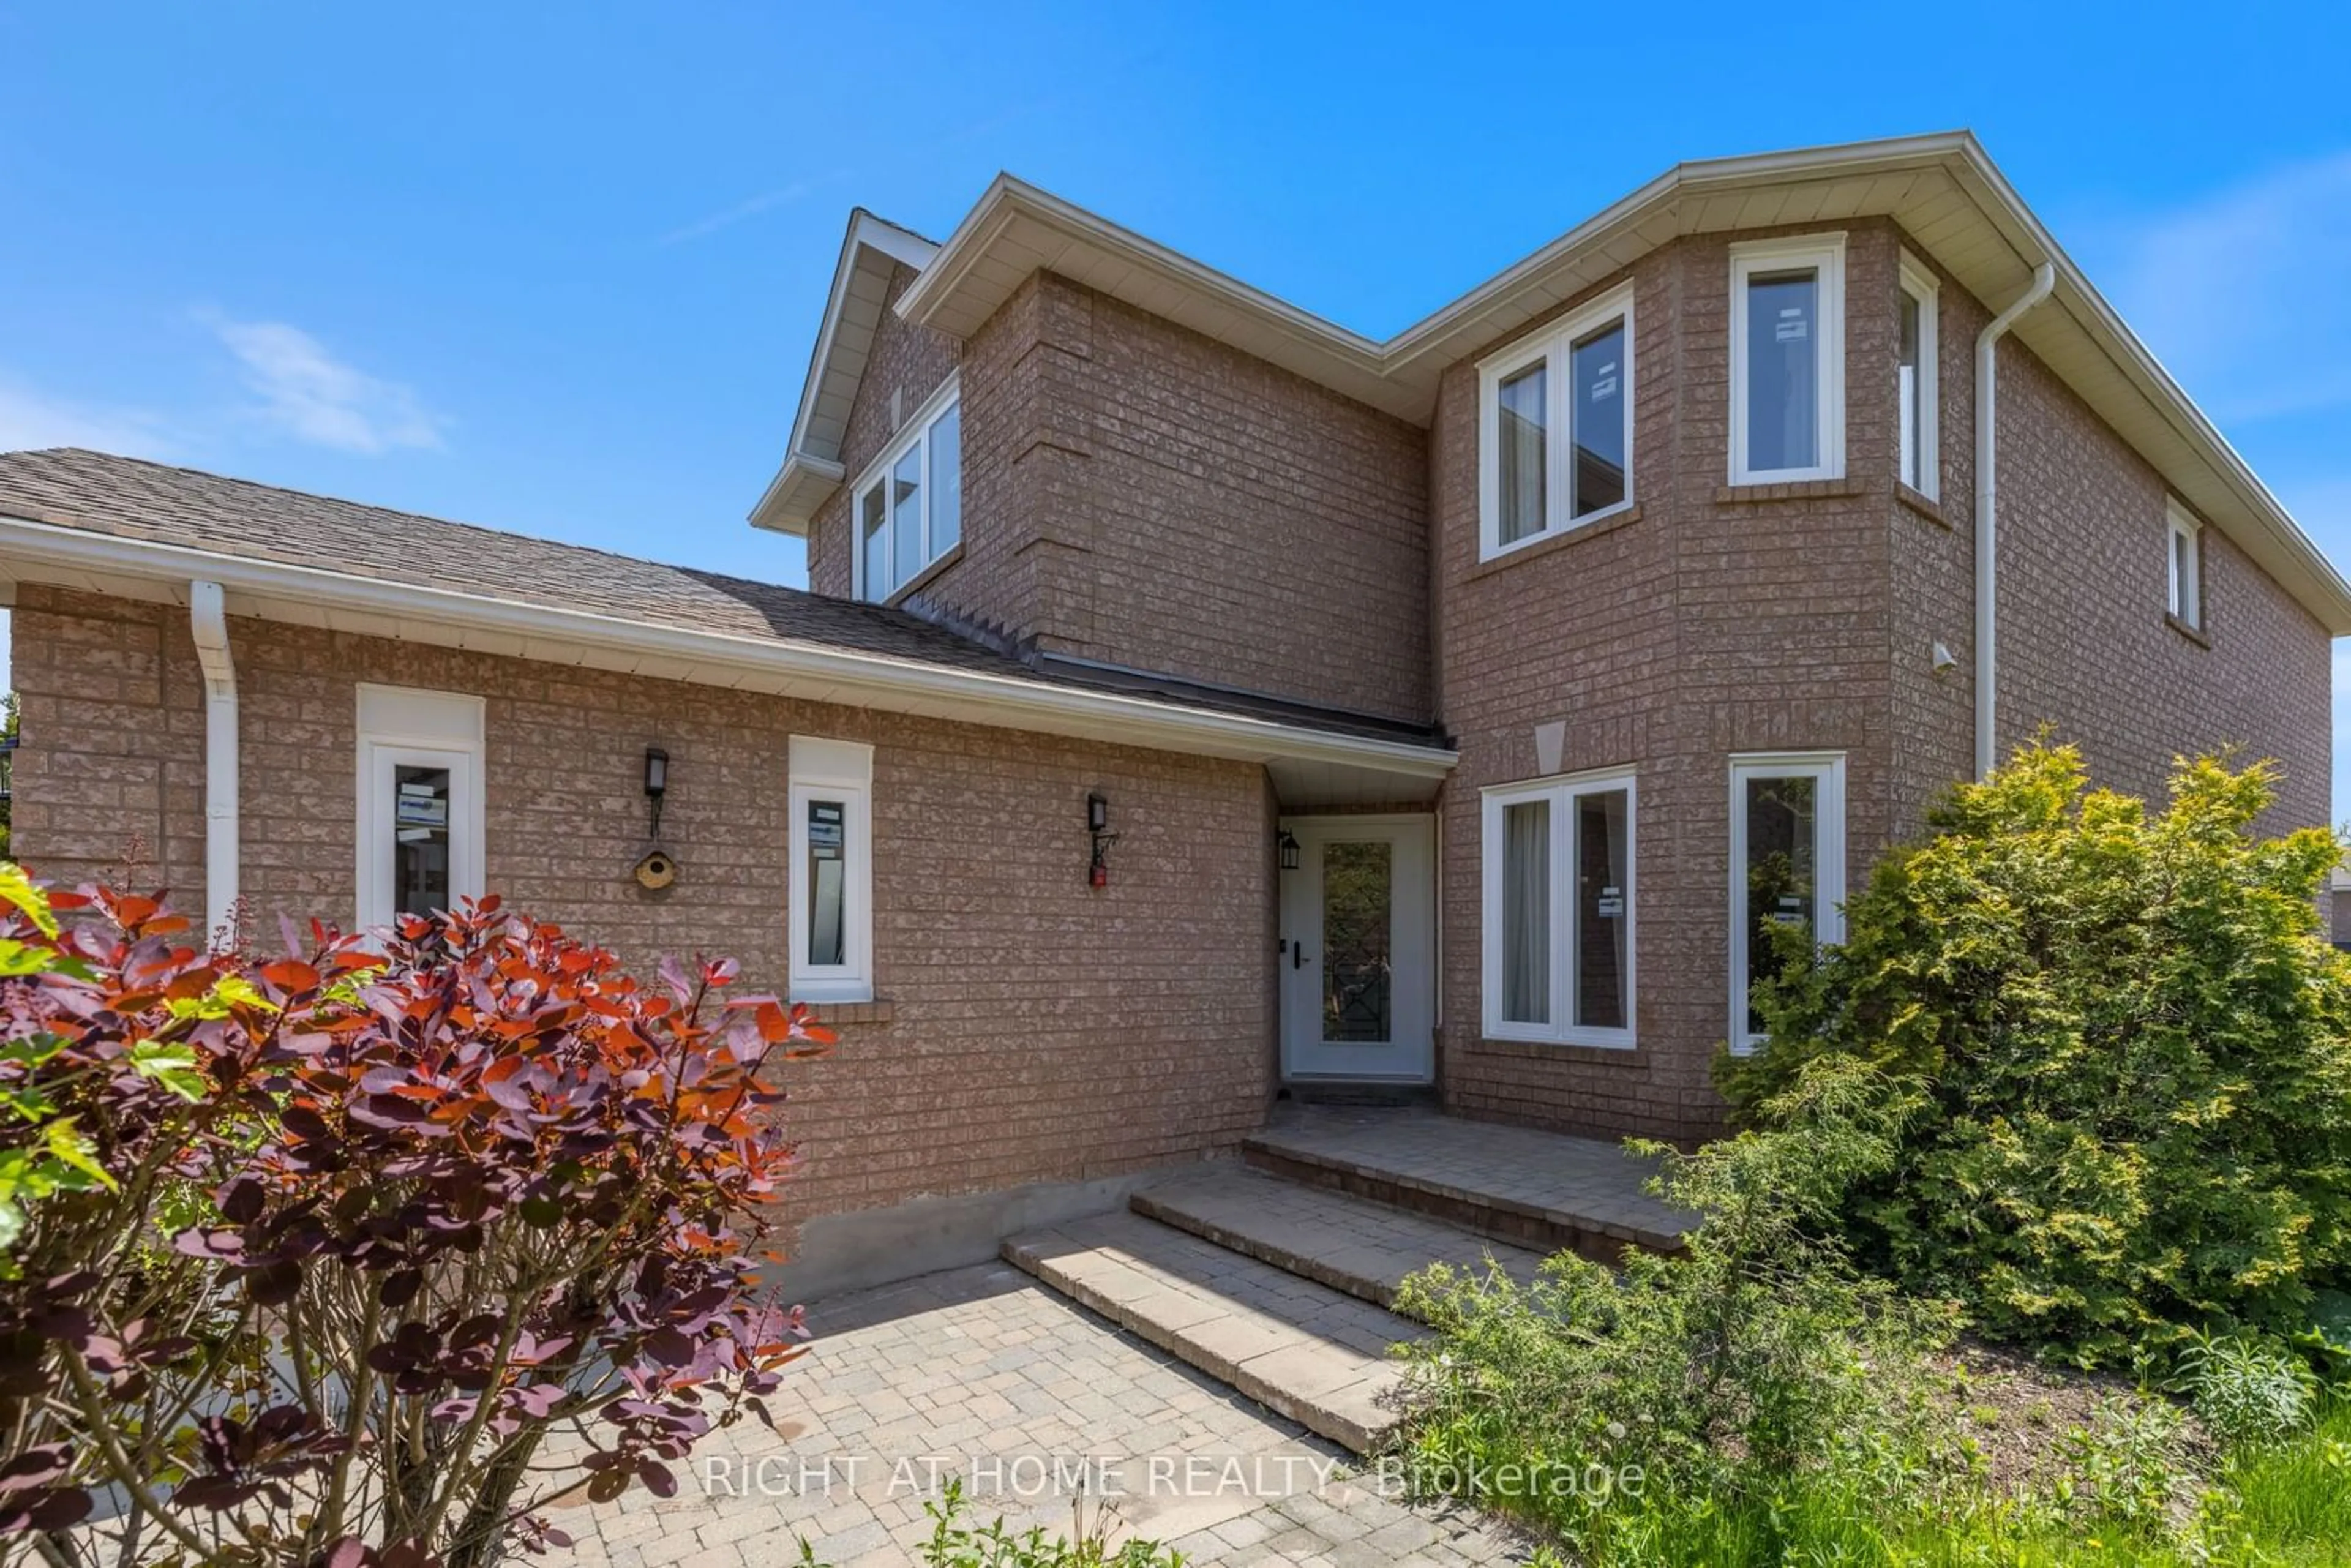 Home with brick exterior material for 53 Salt Creek Ave, Richmond Hill Ontario L4S 1P7